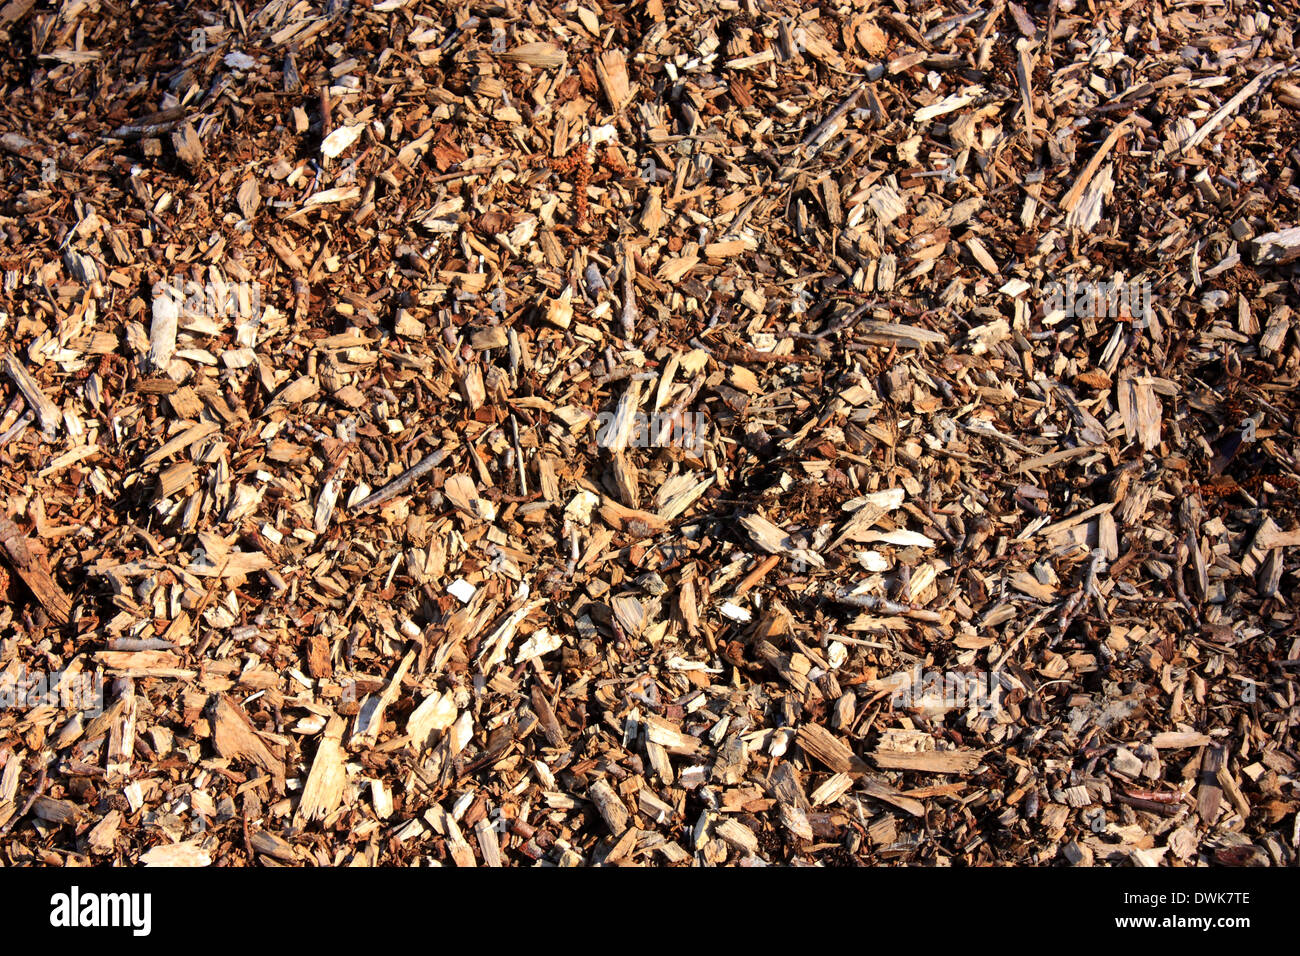 a close up view of woodchips ideal as a background image Stock Photo